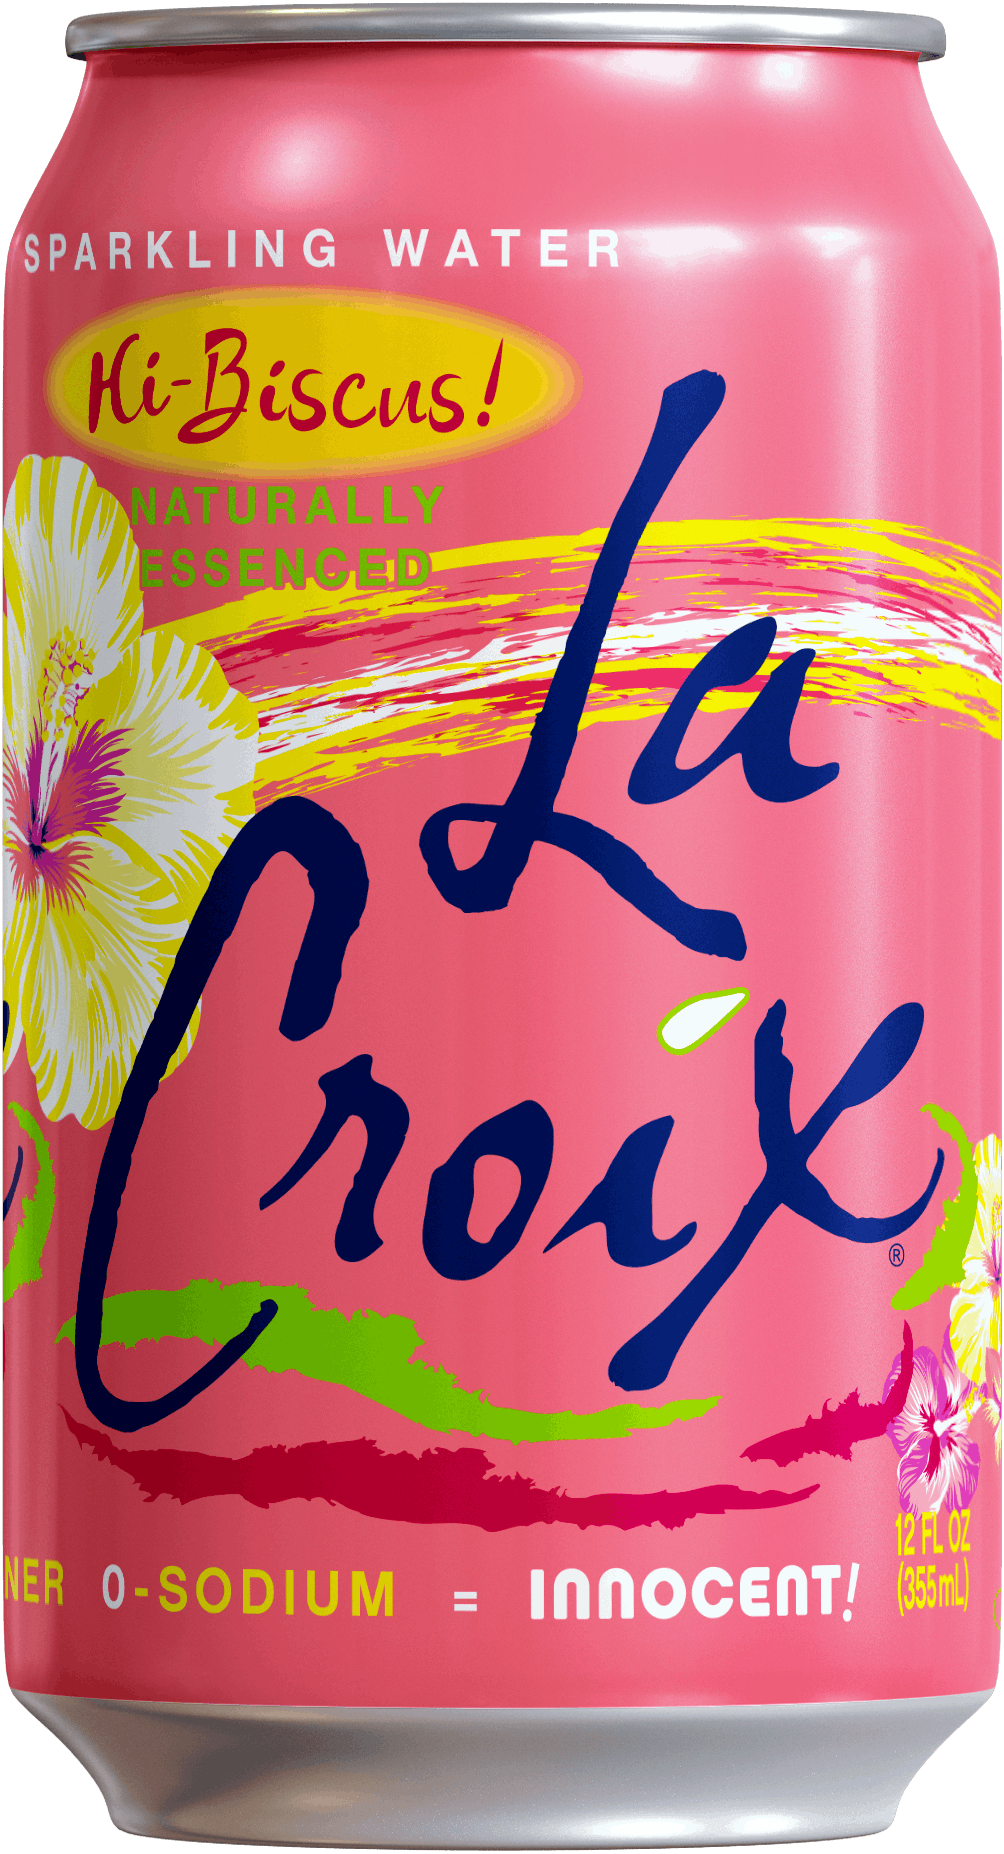 Hi-Biscus joins 24 innovative sparkling flavors of LaCroix